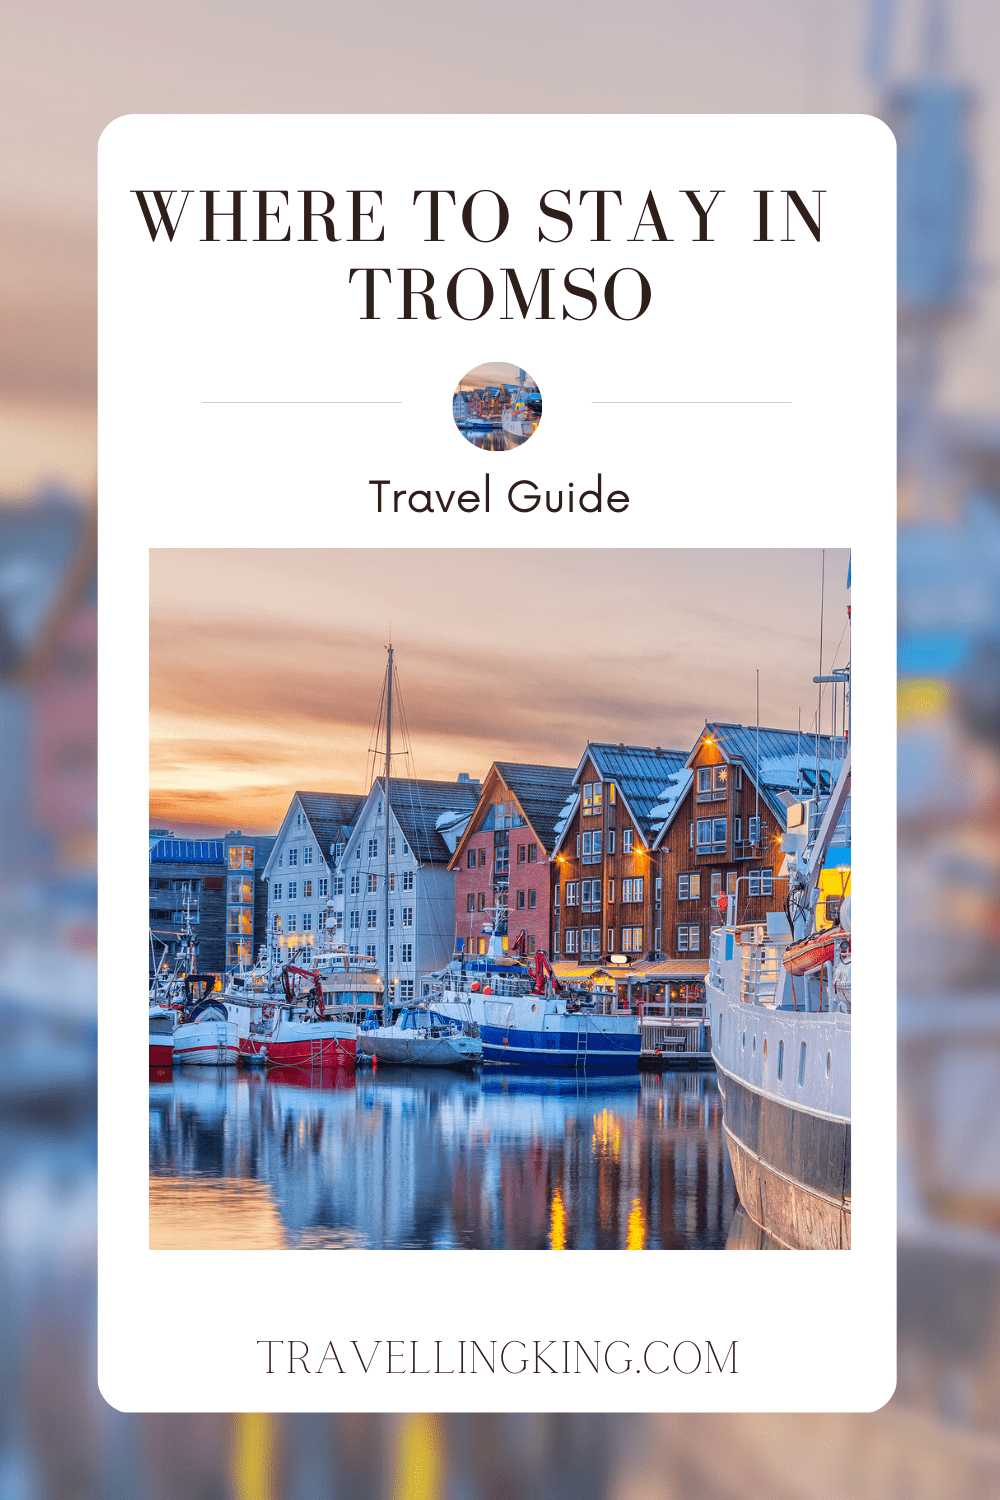 Where to stay in Tromso